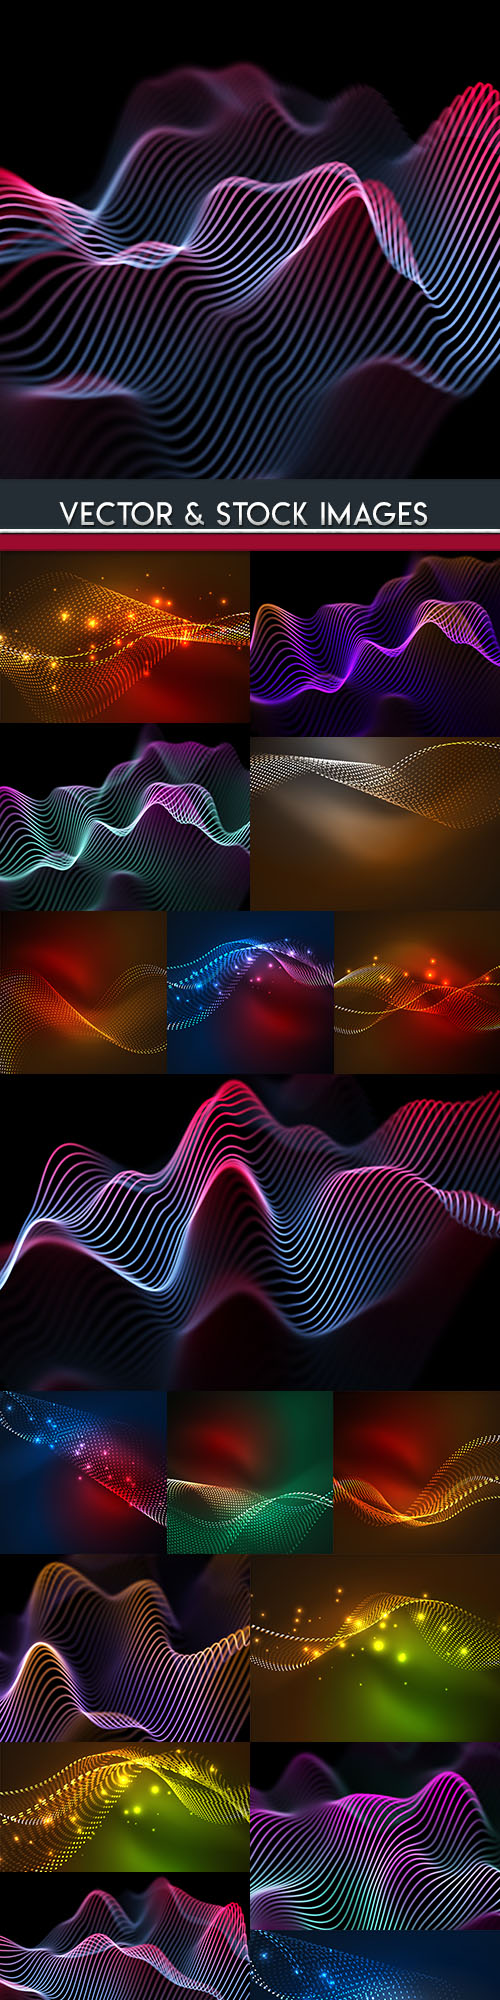 Bright lines neon background decorative abstract